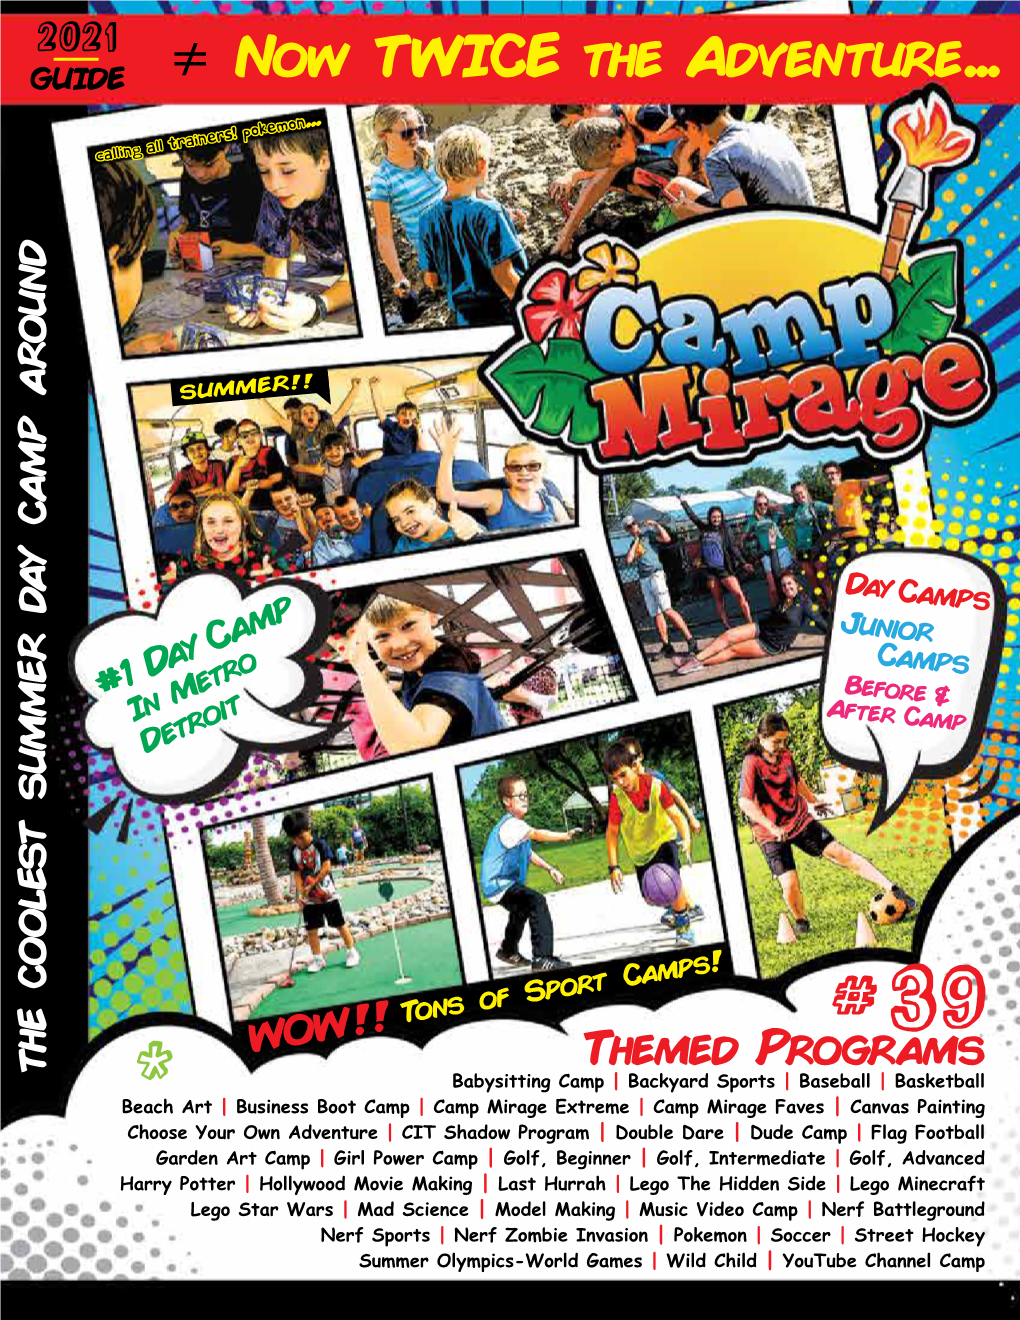 Tons of Sport Camps!